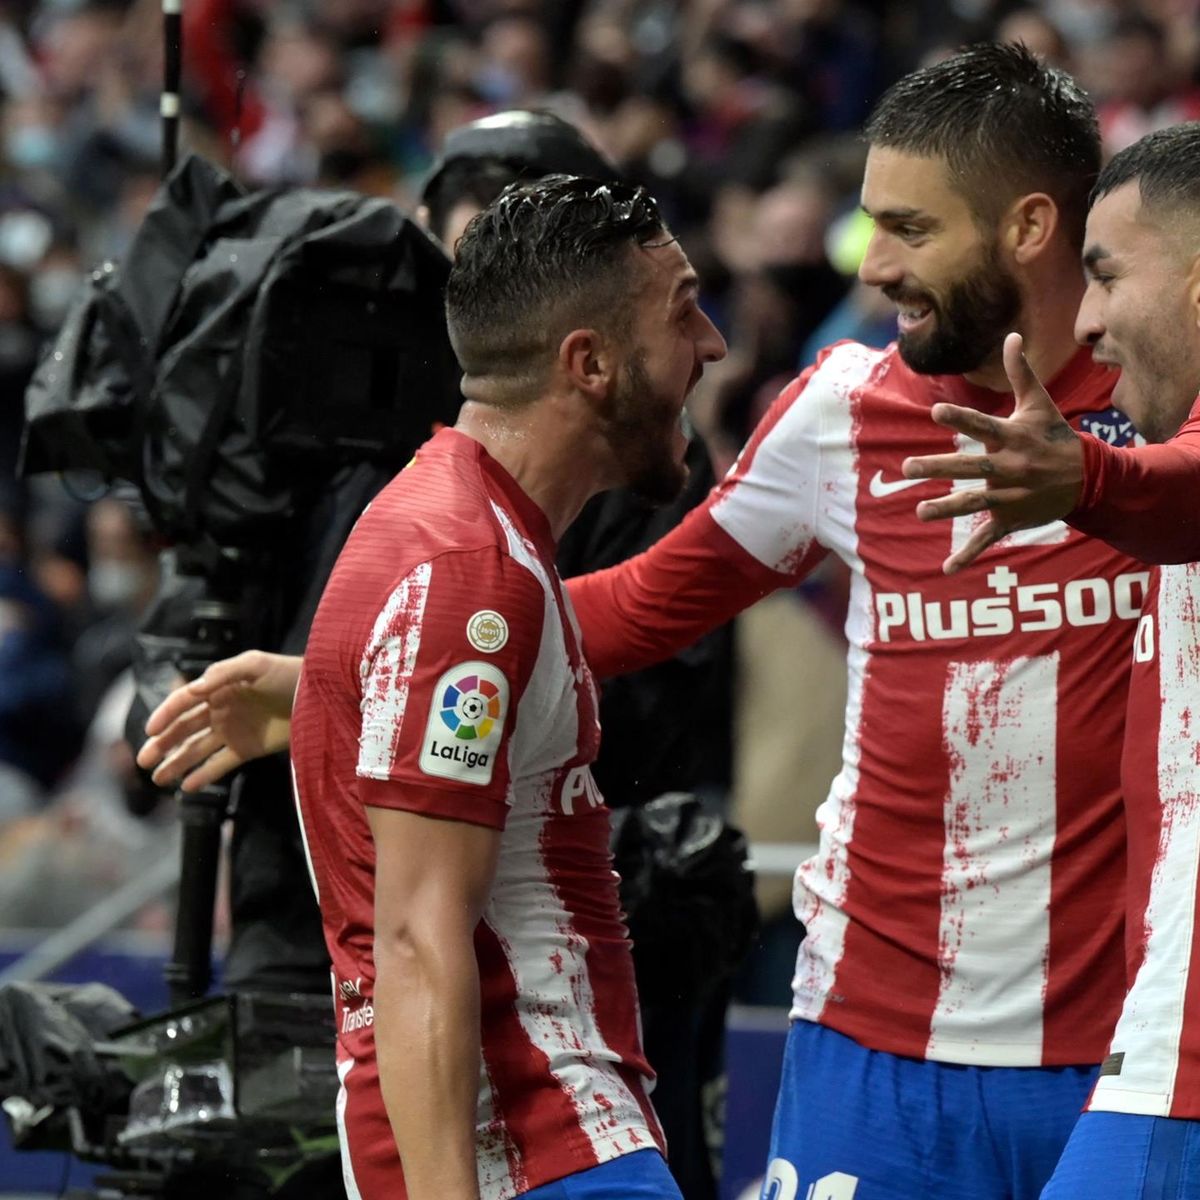 Atletico Madrid 3-0 Real Betis: Yannick Carrasco and Joao Felix among the goals as champions close in on Liga leaders